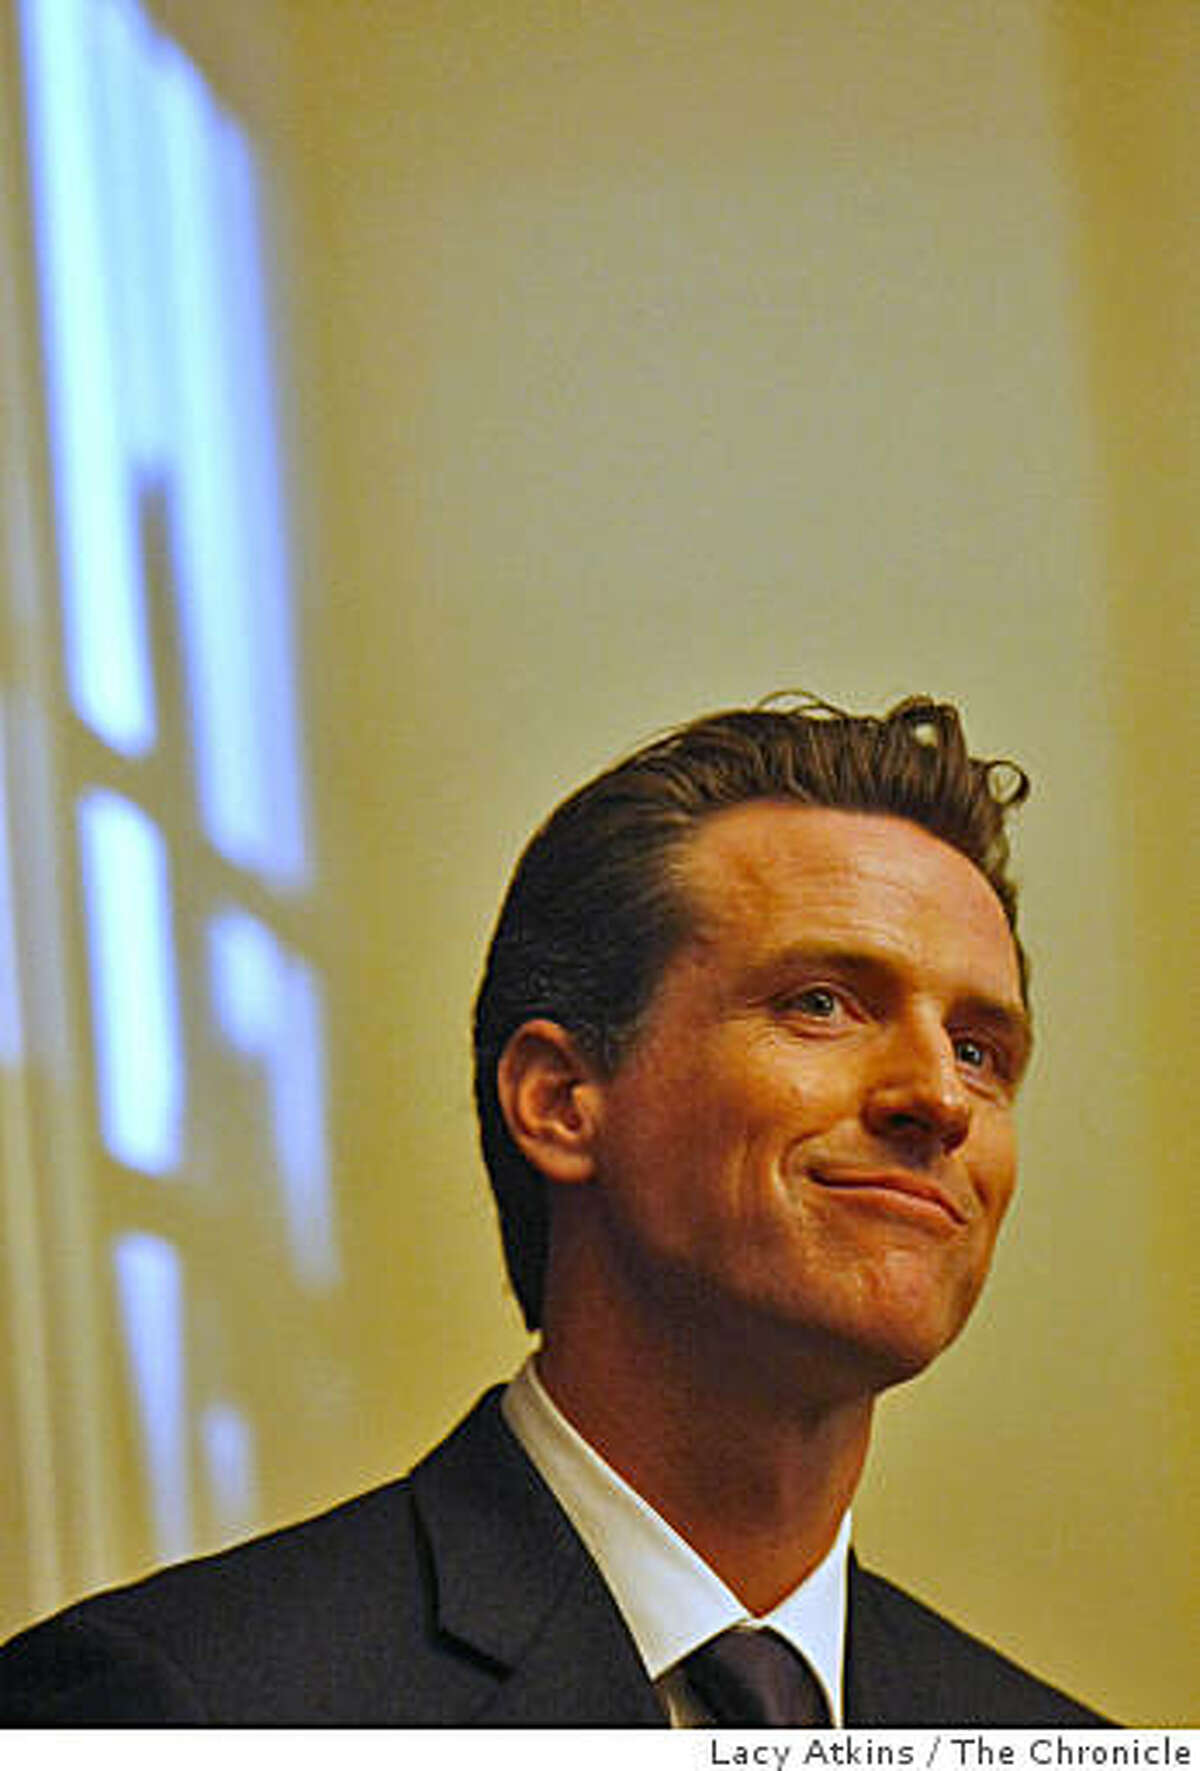 Mayor Gavin Newsom speaks as one of the guests for up and coming young political figures at the Time magazine breakfast as part of the Democratic National Convention, Tuesday Aug.26, 2008, in Denver, Colorado.